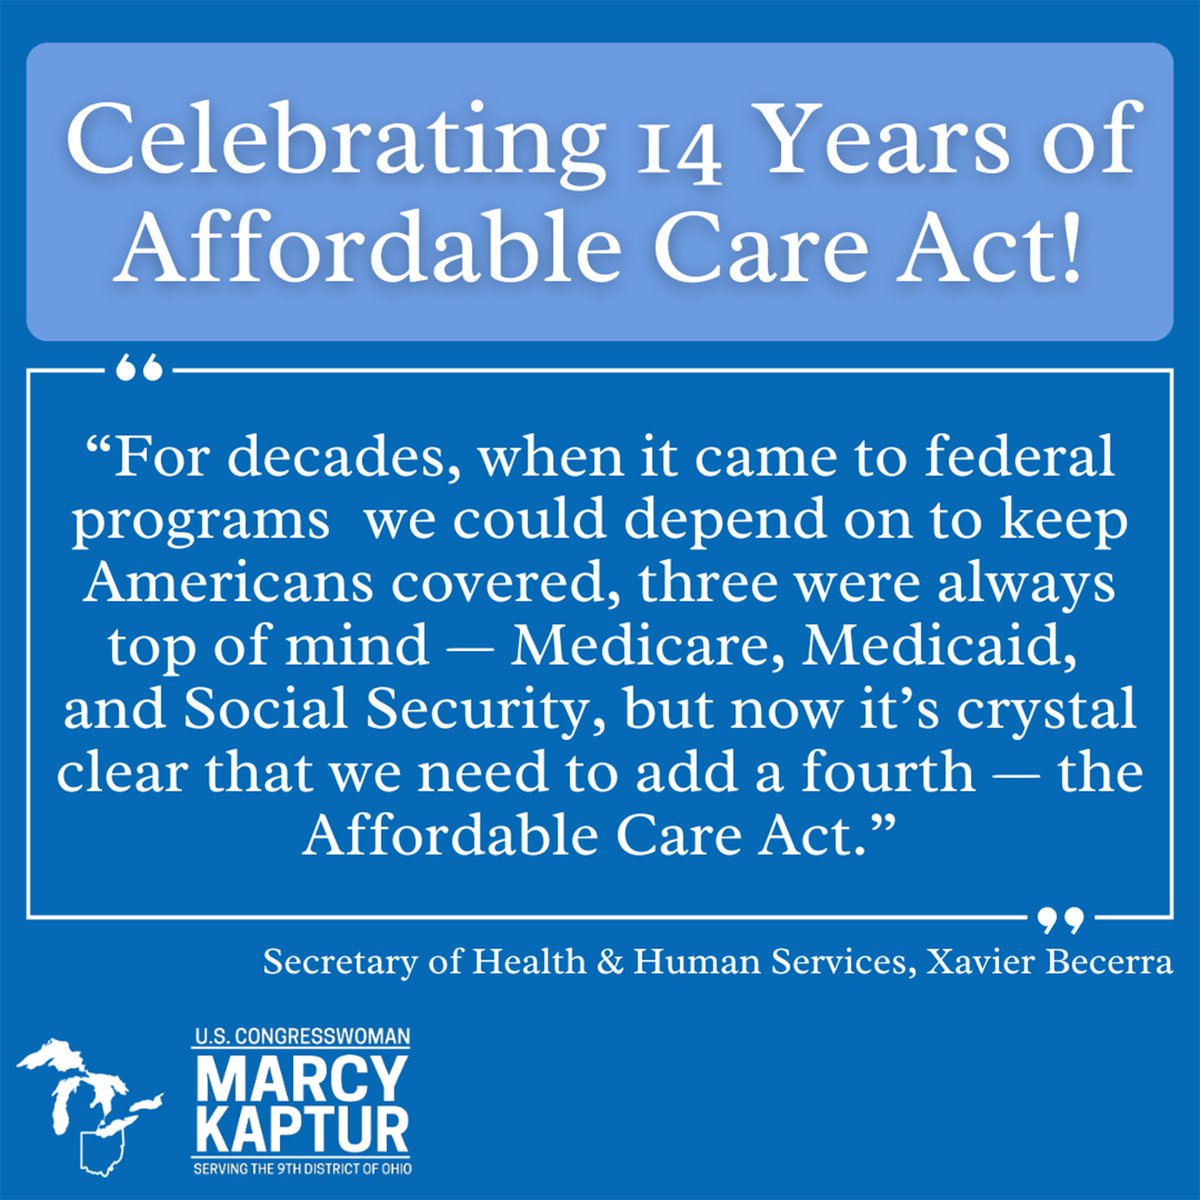 The ACA has been a beacon of progress, providing millions with access to quality health care. Today we're building on it by making it more affordable, helping small business, closing Medicaid gaps, keeping kids covered, expanding home care, and ensuring mental health care. #ACA14